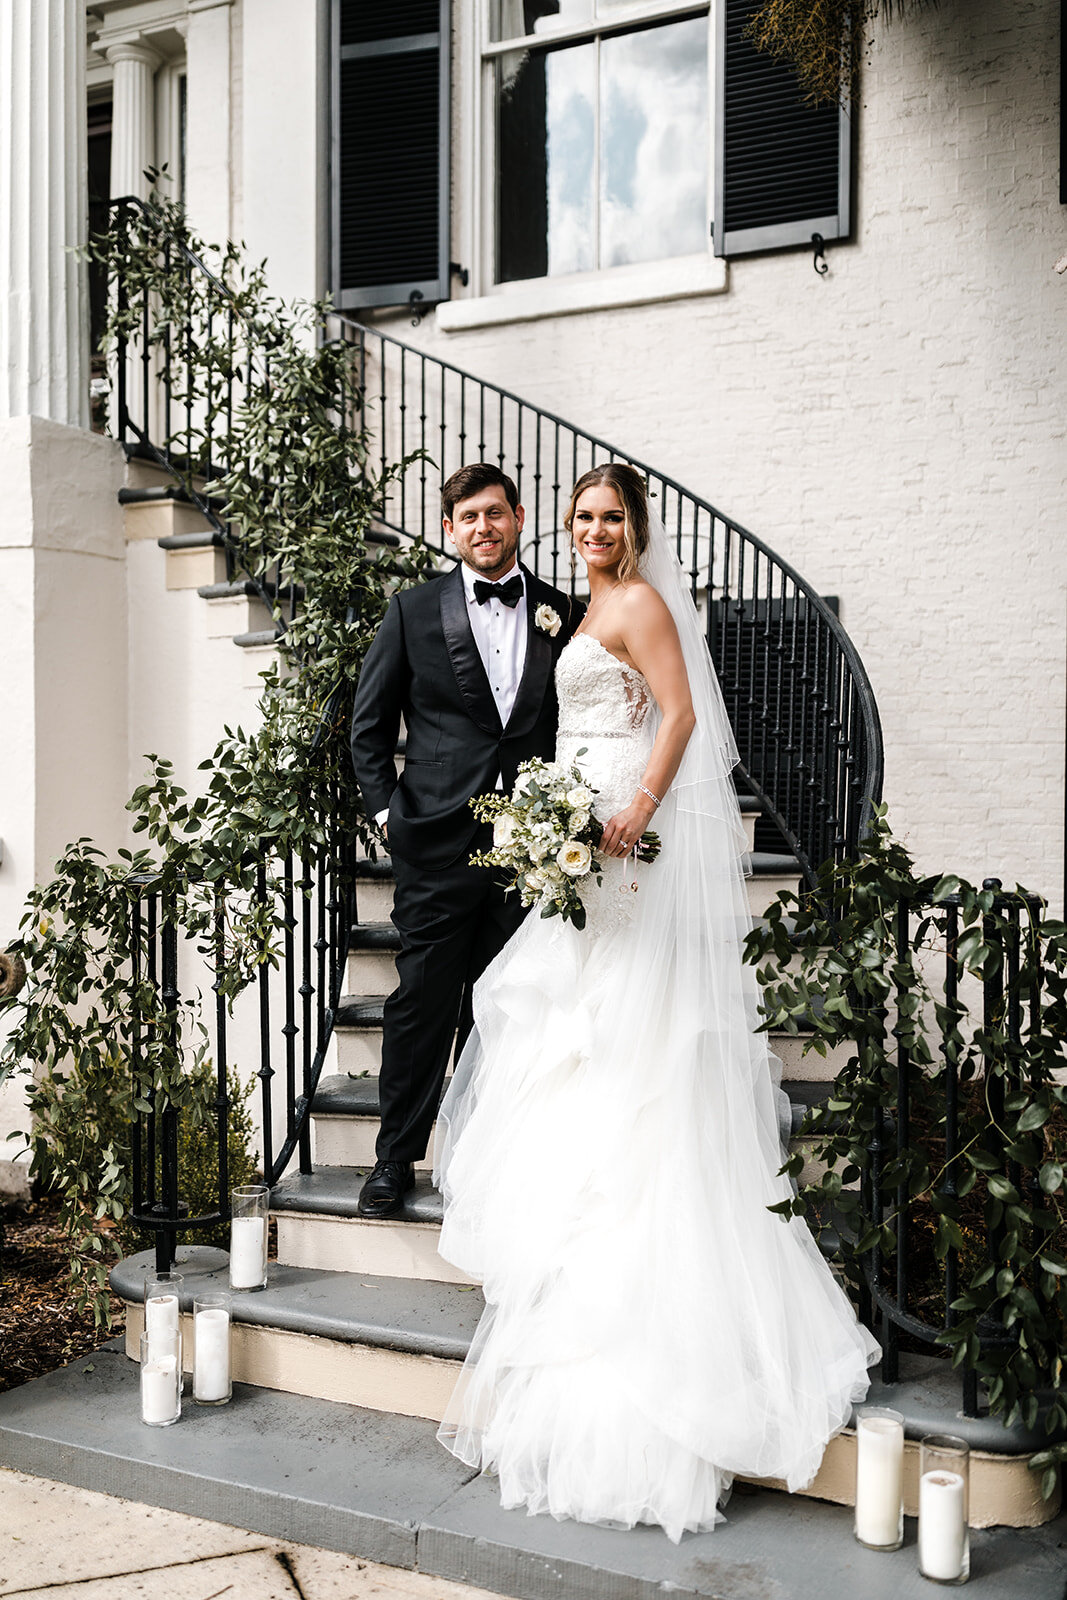 ivory-and-bride-down-for-the-gown-cassie-real-bride-wedding-dress-maggie-sottero-blog-bridal-blog-wedding-dress-mermaid-bridal-gown-wedding-gown-bridal-shop-bridal-boutique-bridal-shopping-bridal-style-savannah-georgia-GMP504-415.jpg